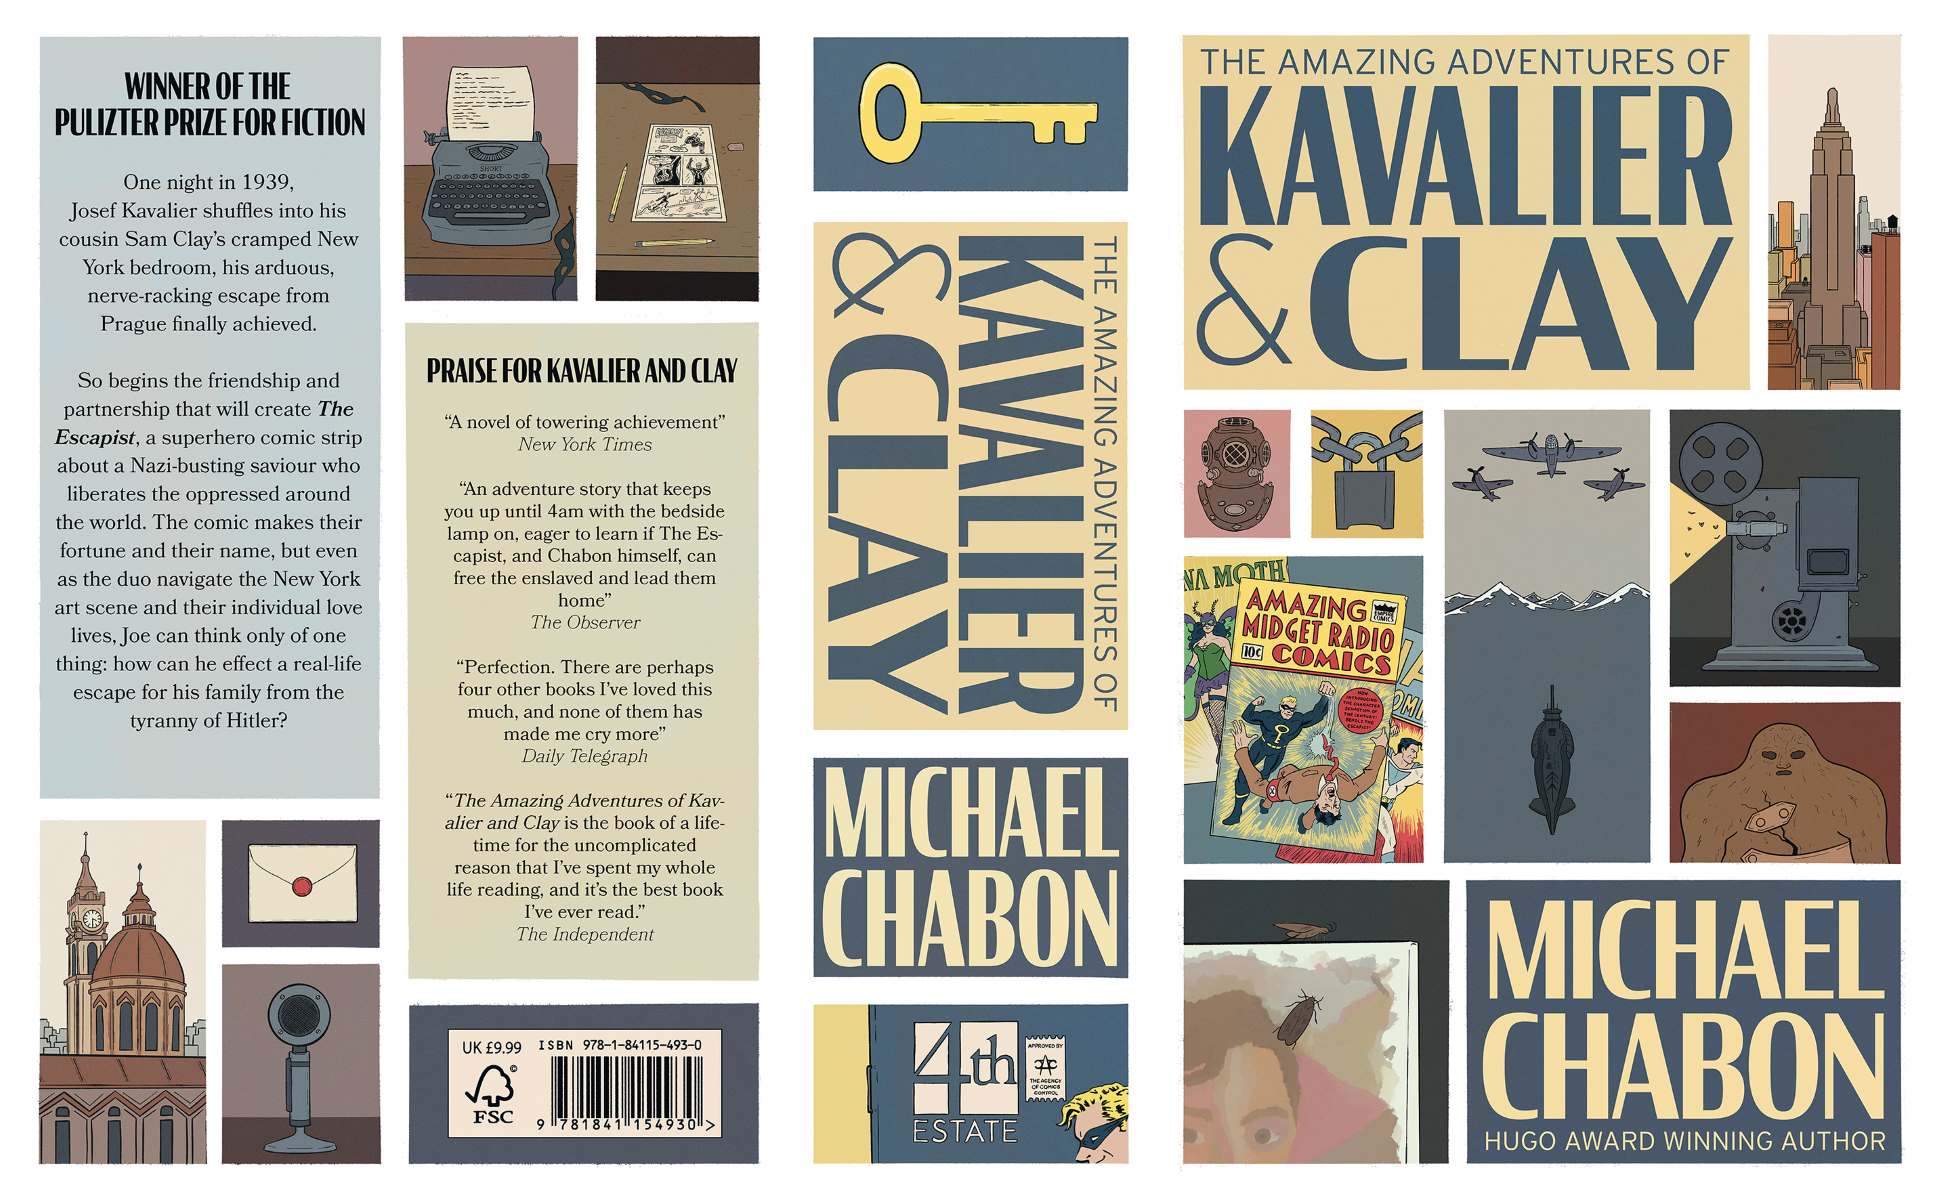 19-unbelievable-facts-about-the-amazing-adventures-of-kavalier-clay-michael-chabon